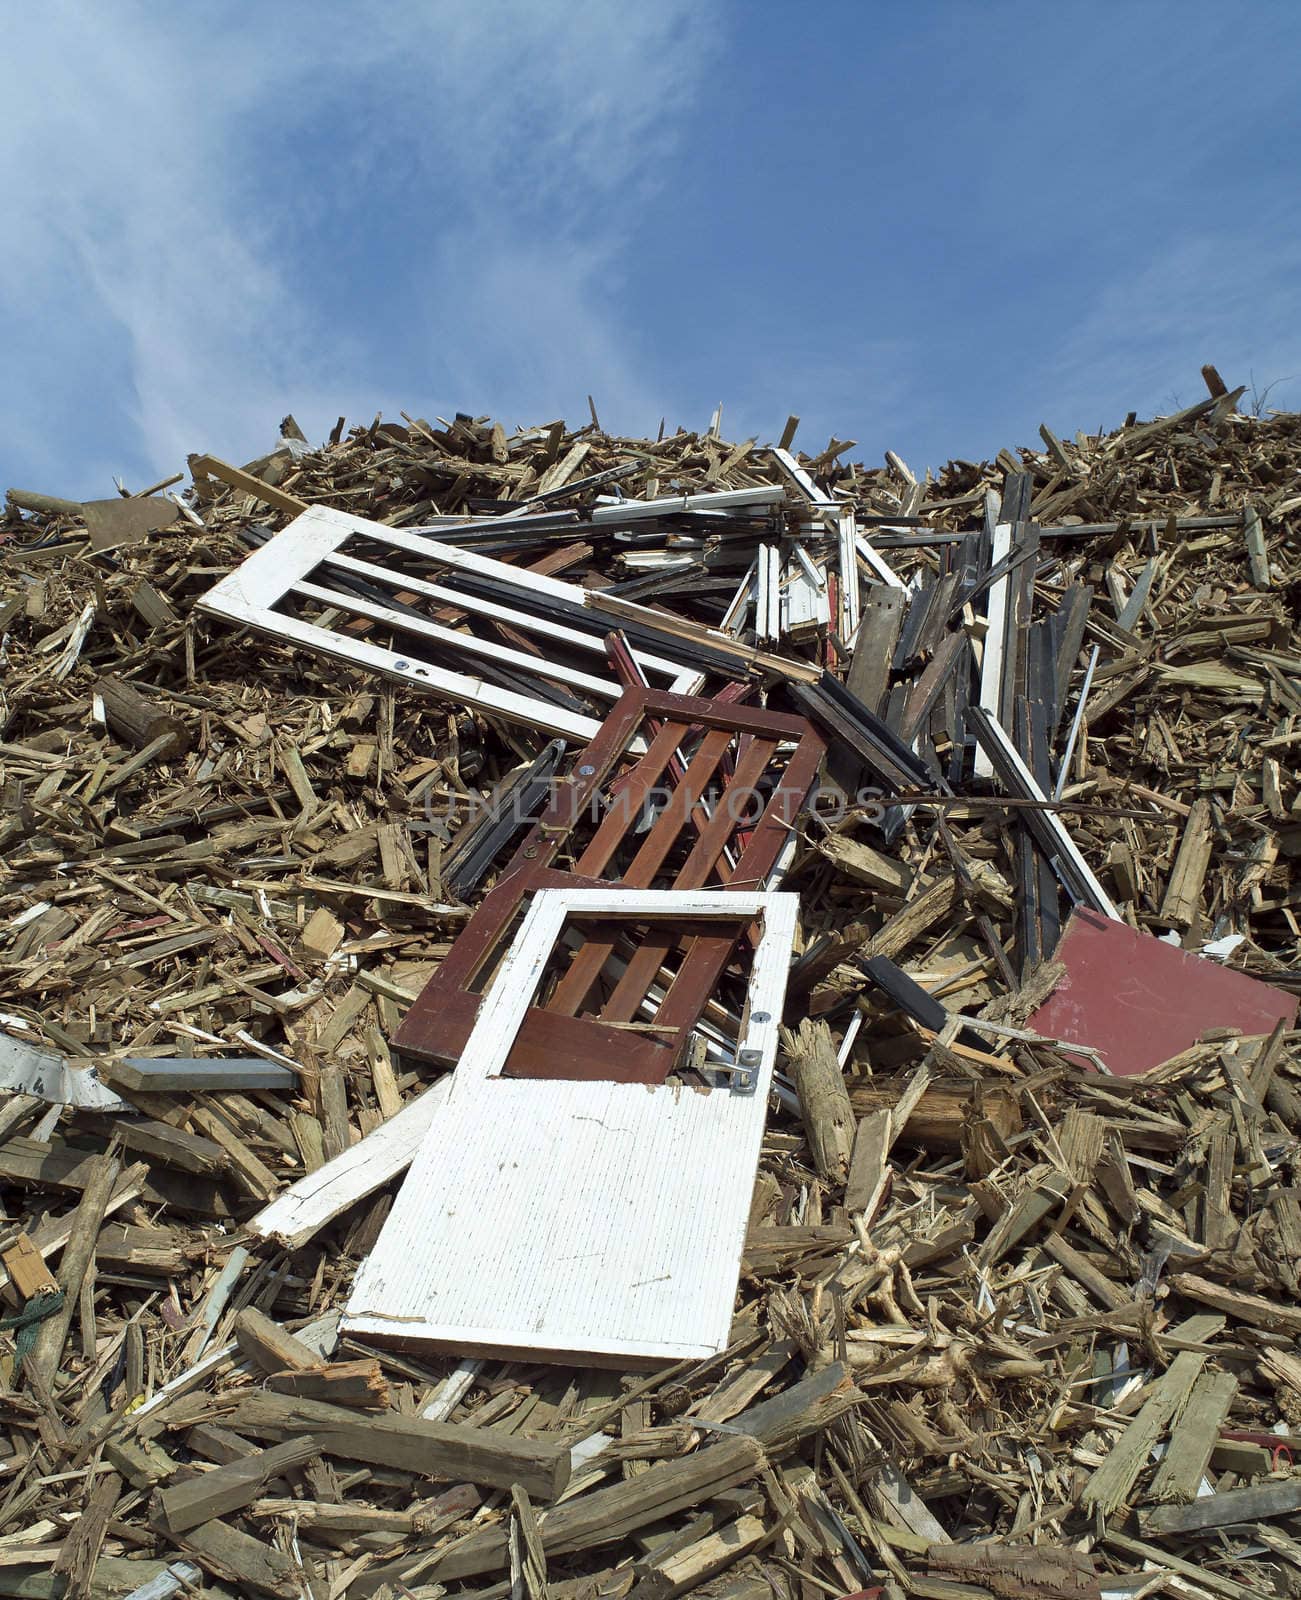 Heap of Wood Garbage in front of blue sky